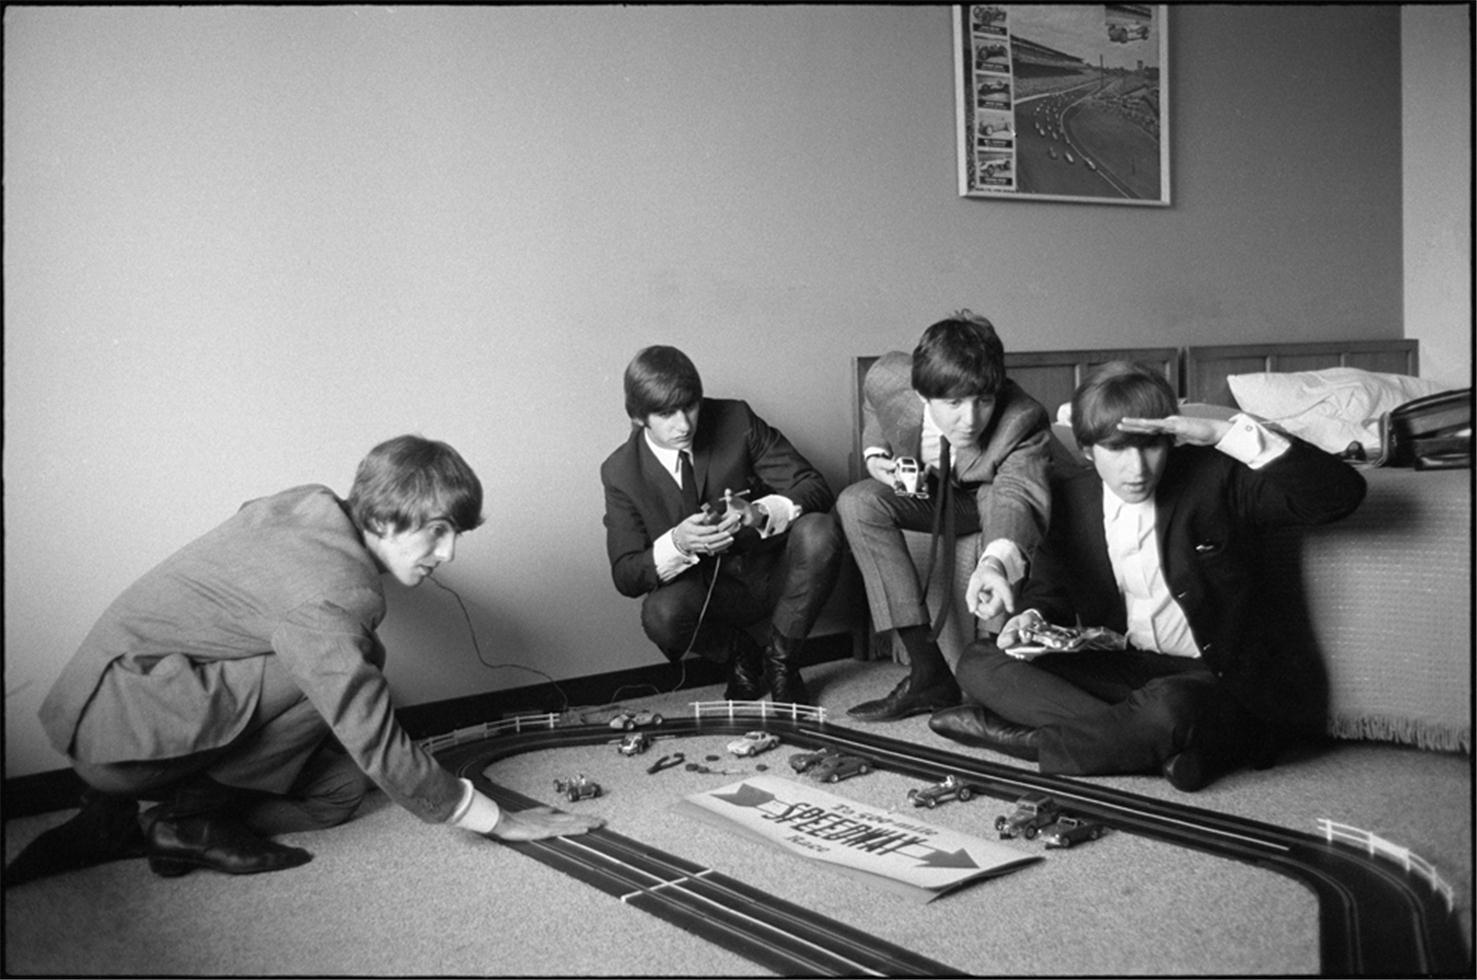 Curt Gunther Black and White Photograph - The Beatles, Indianapolis, IN